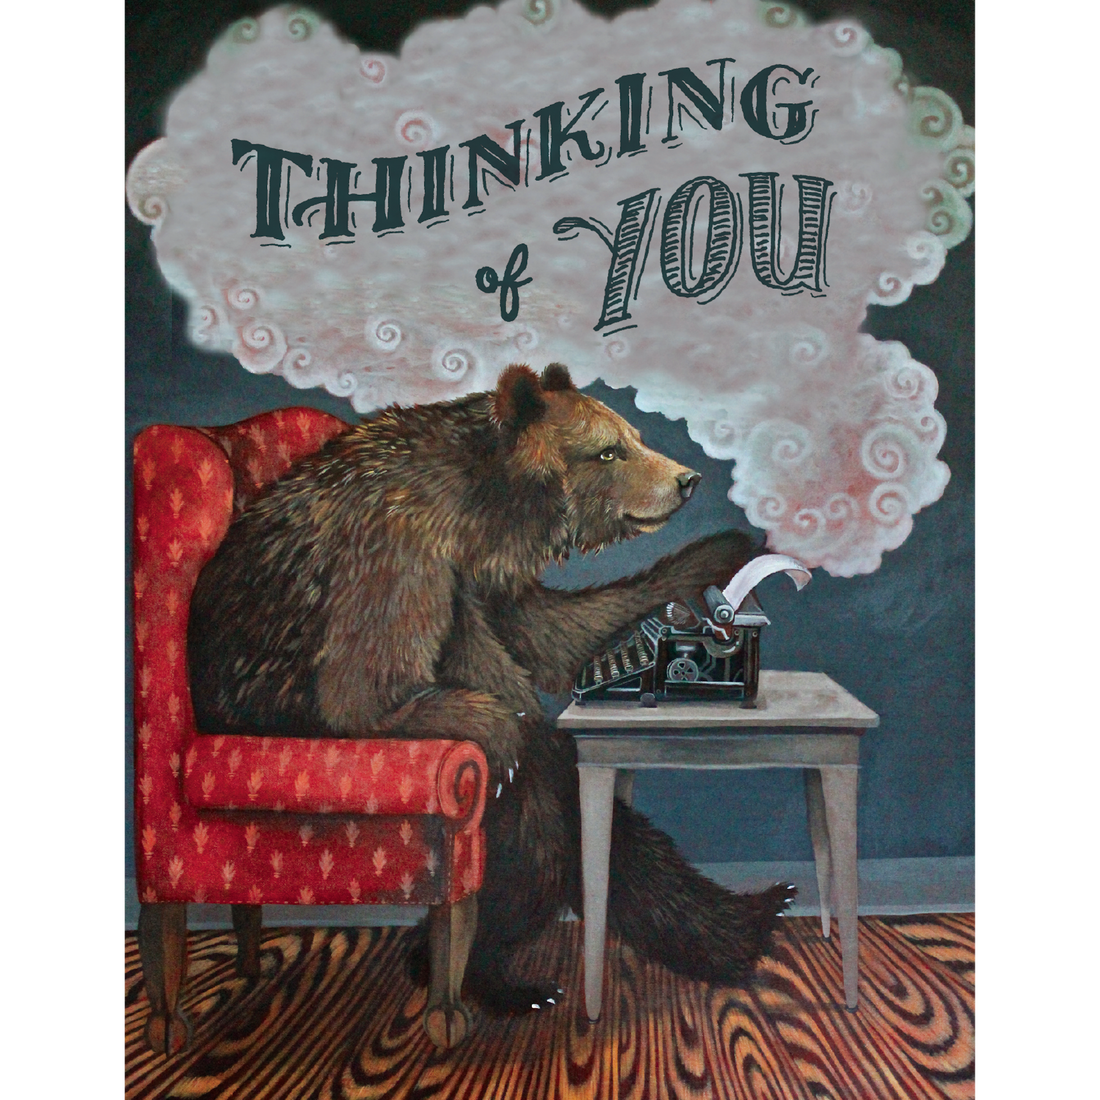 A whimsical illustration of a brown bear seated on a red chair using an old-fashioned typewriter, with a thought bubble reading &quot;thinking of you&quot; above it.